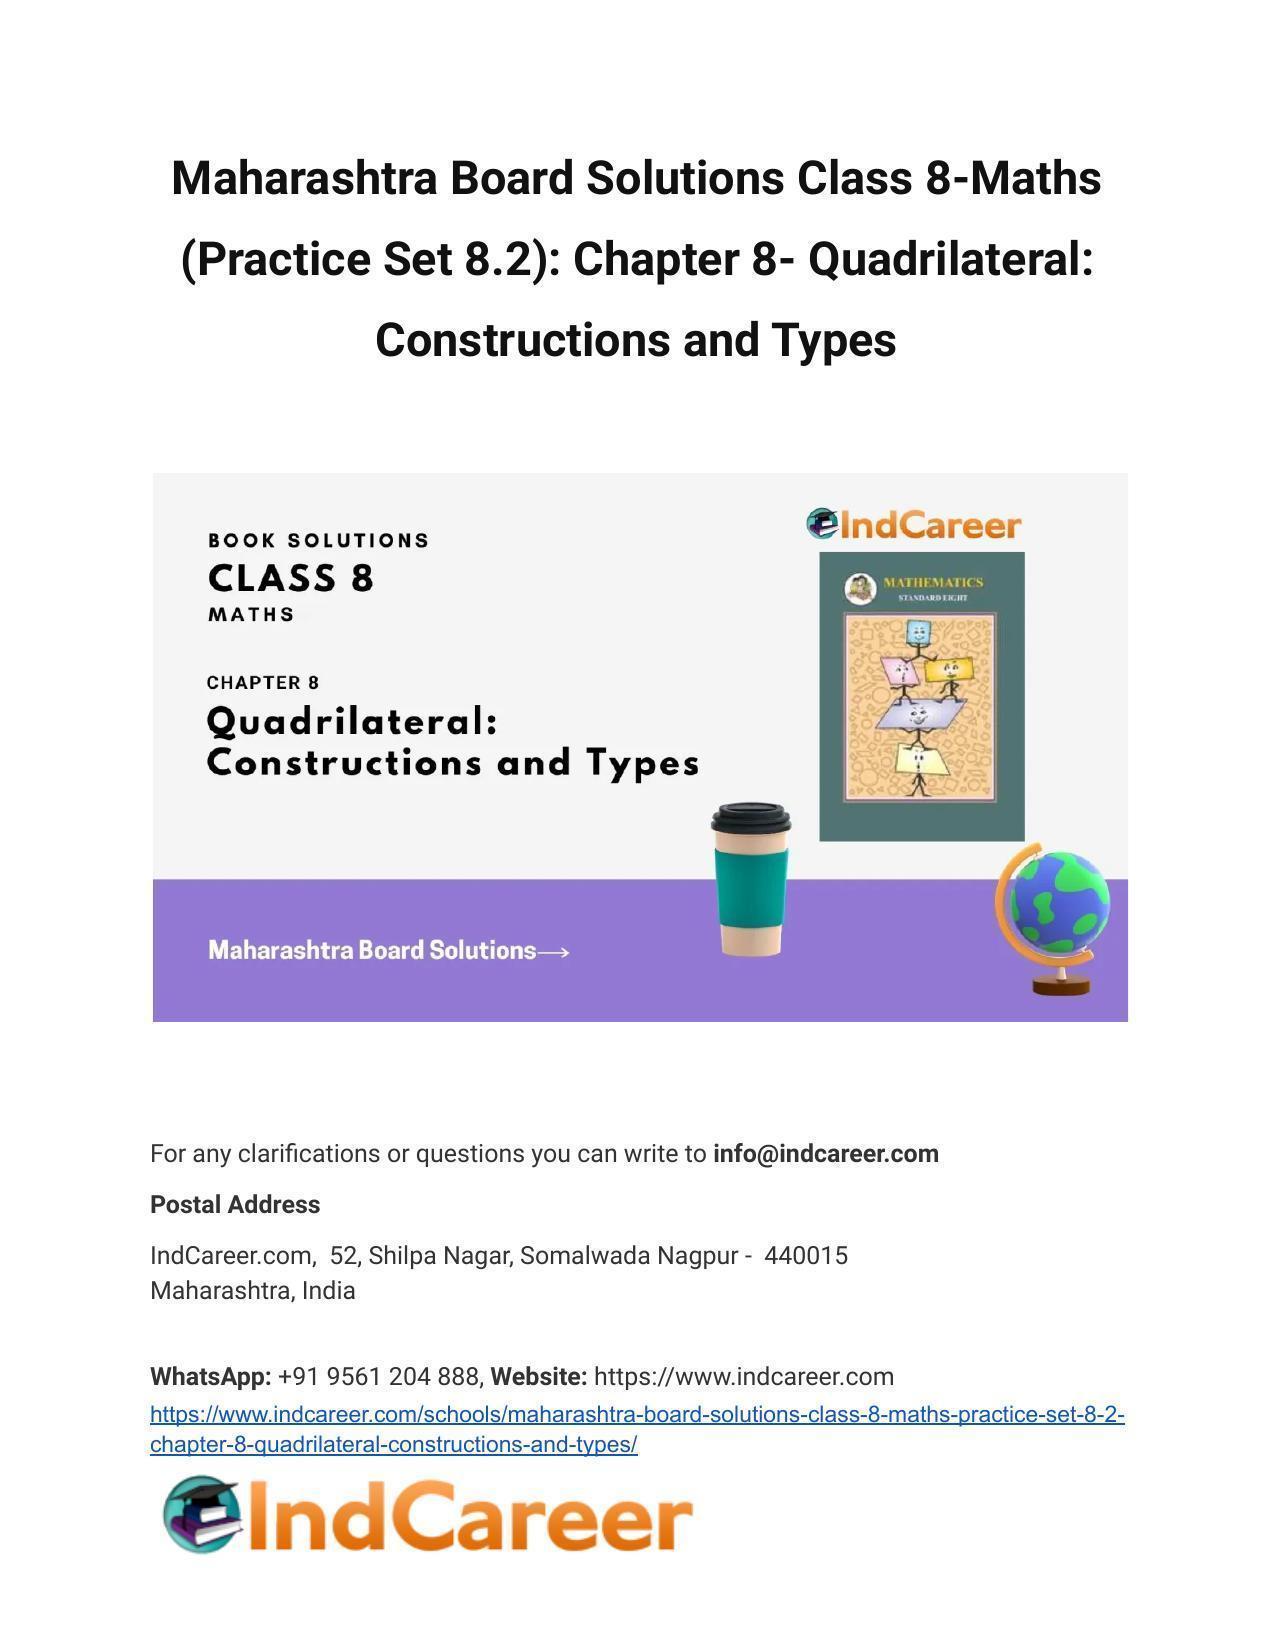 Maharashtra Board Solutions Class 8-Maths (Practice Set 8.2): Chapter 8- Quadrilateral: Constructions and Types - Page 1